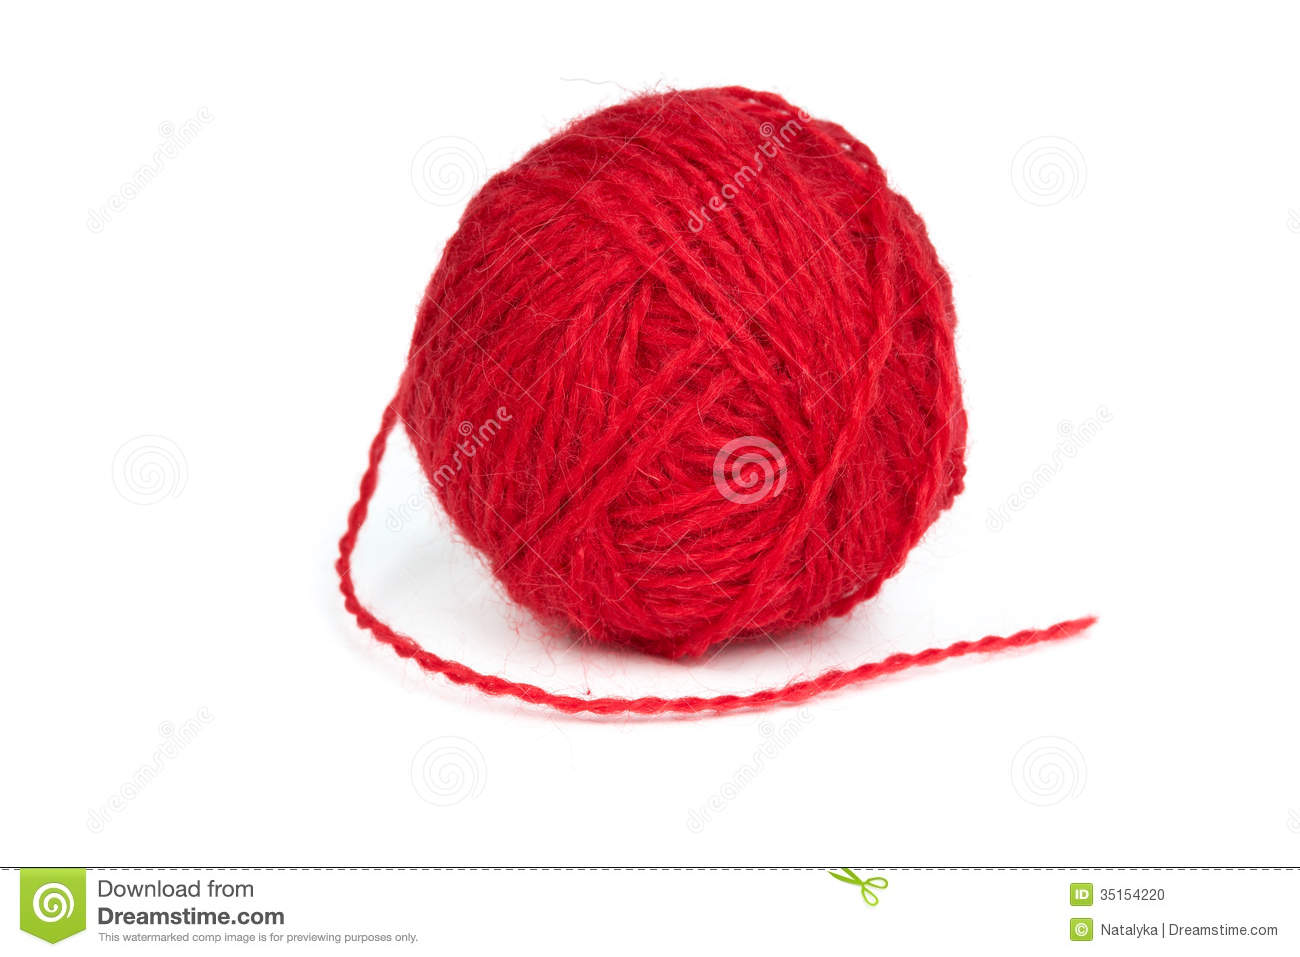 Ball Of Red Wool Yarn Isolated On A White Background